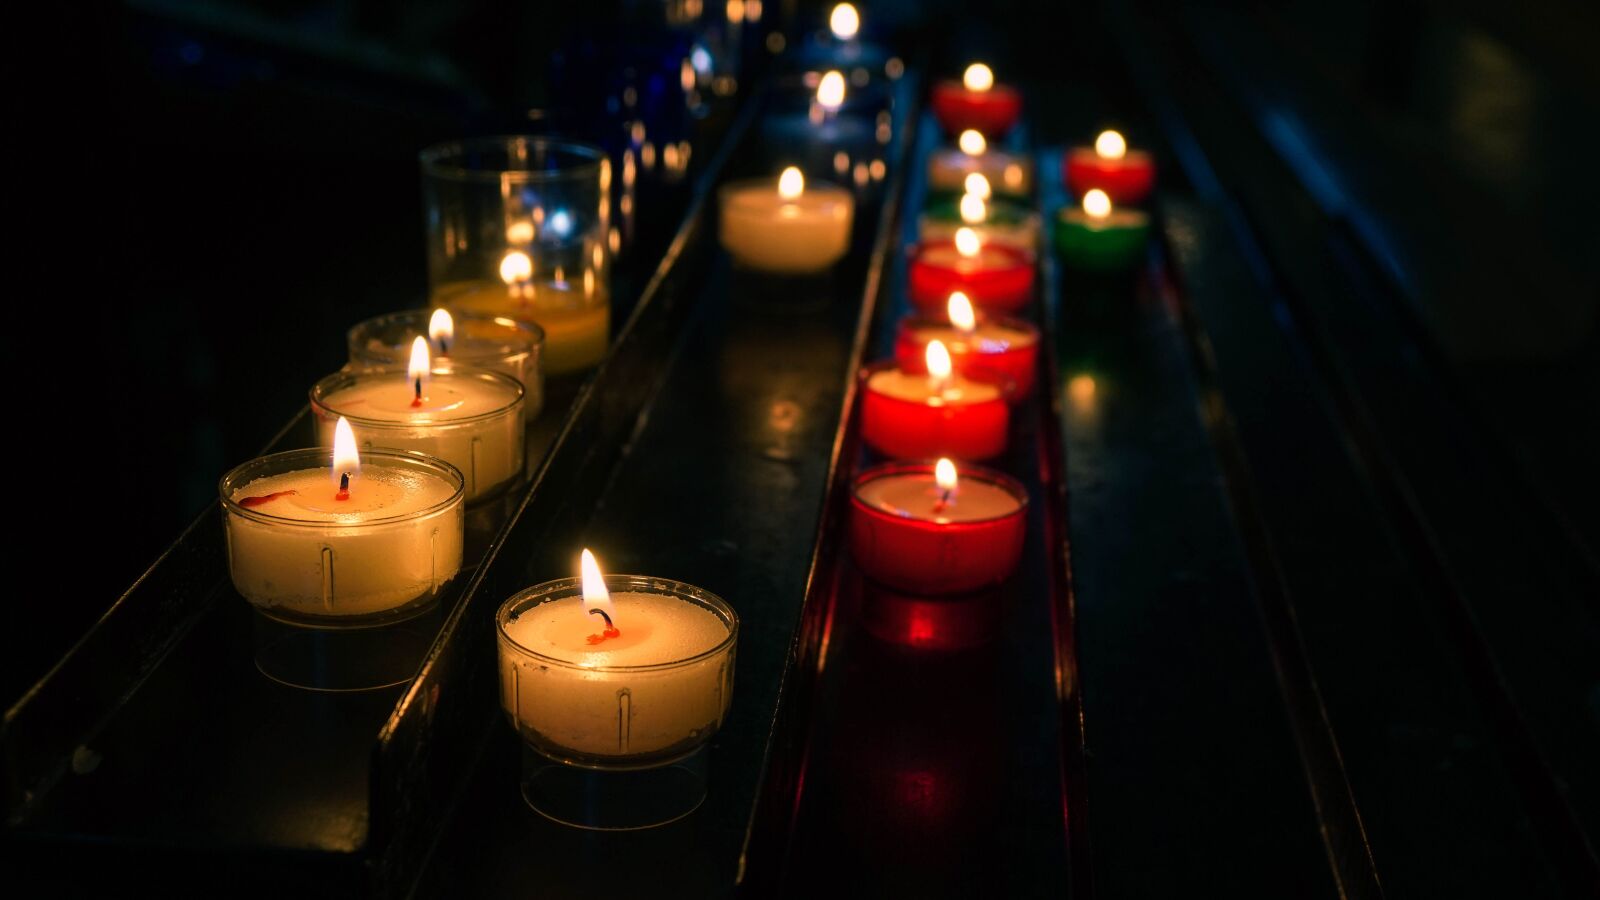 Sony a6500 sample photo. Candles, church, religion photography